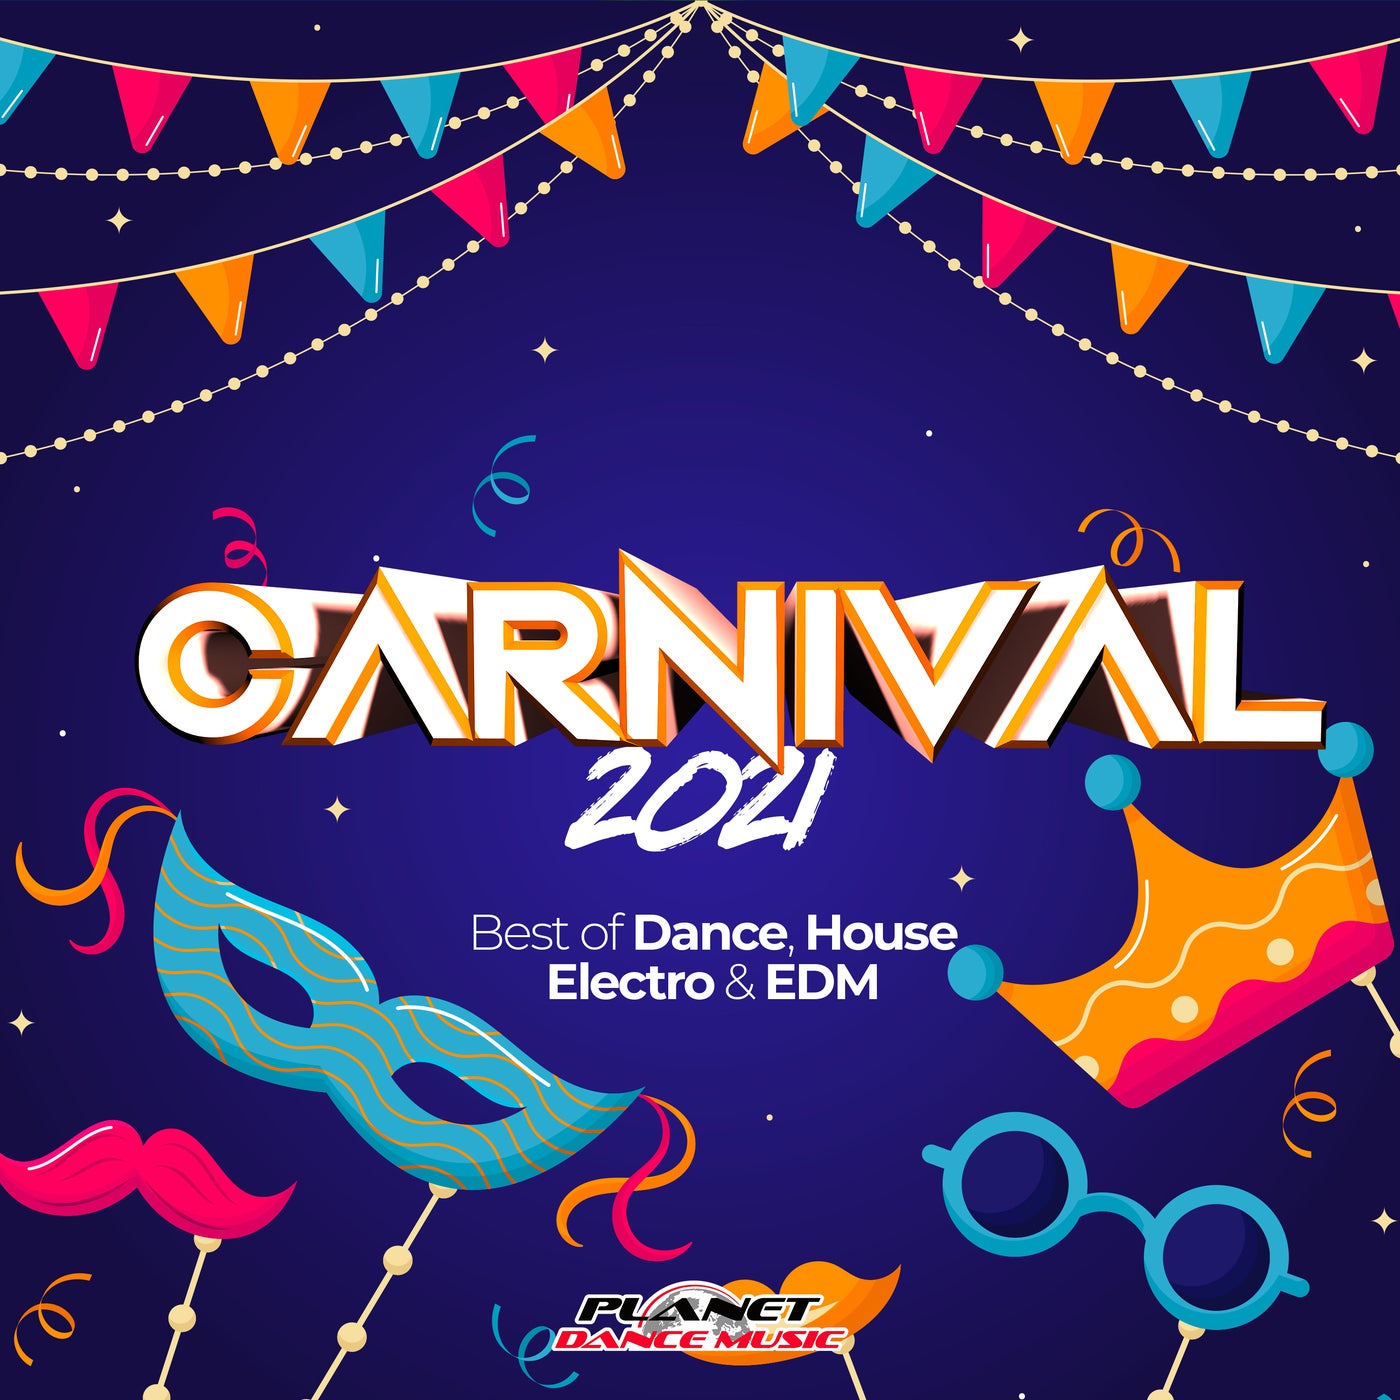 Carnival 2021 (Best of Dance, House, Electro & EDM)